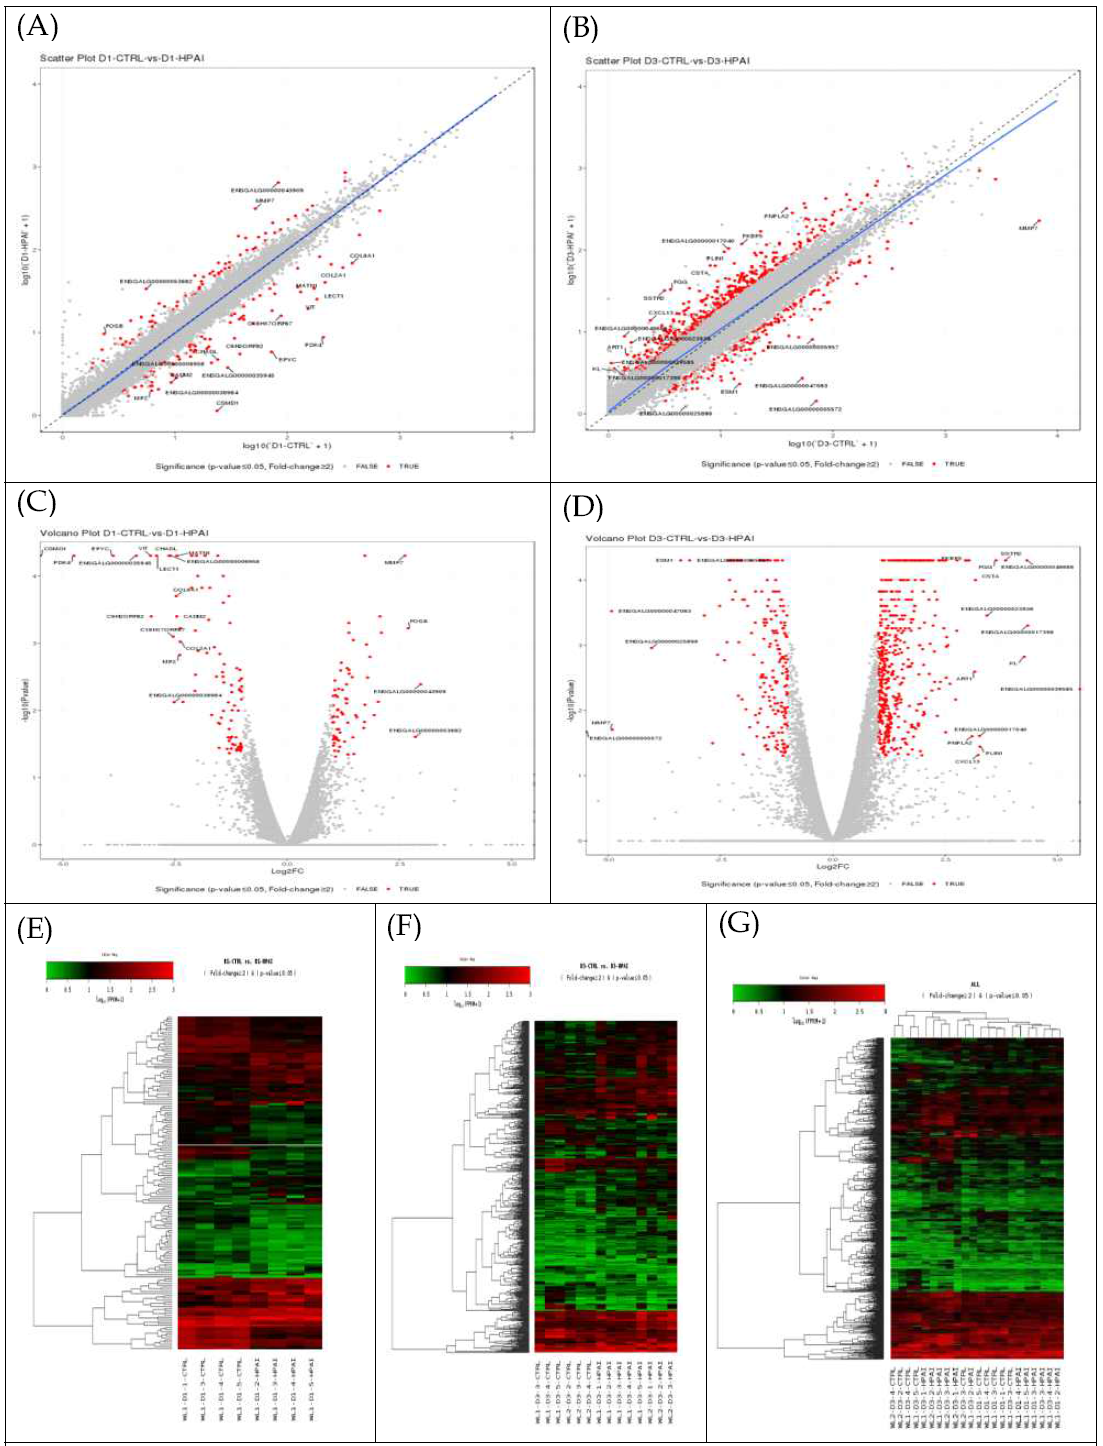 Bioinformatics analayses for differentially expressed genes(DEGs) identified by CuffDiff. Scatter plots for DEGs of day 1(A) and day 3(B) after HPAIV infection. Volcano plots for DEGs of day1(C) and day3(D). Heatmaps for DEGs of day1(E), day3(F) and all(G)